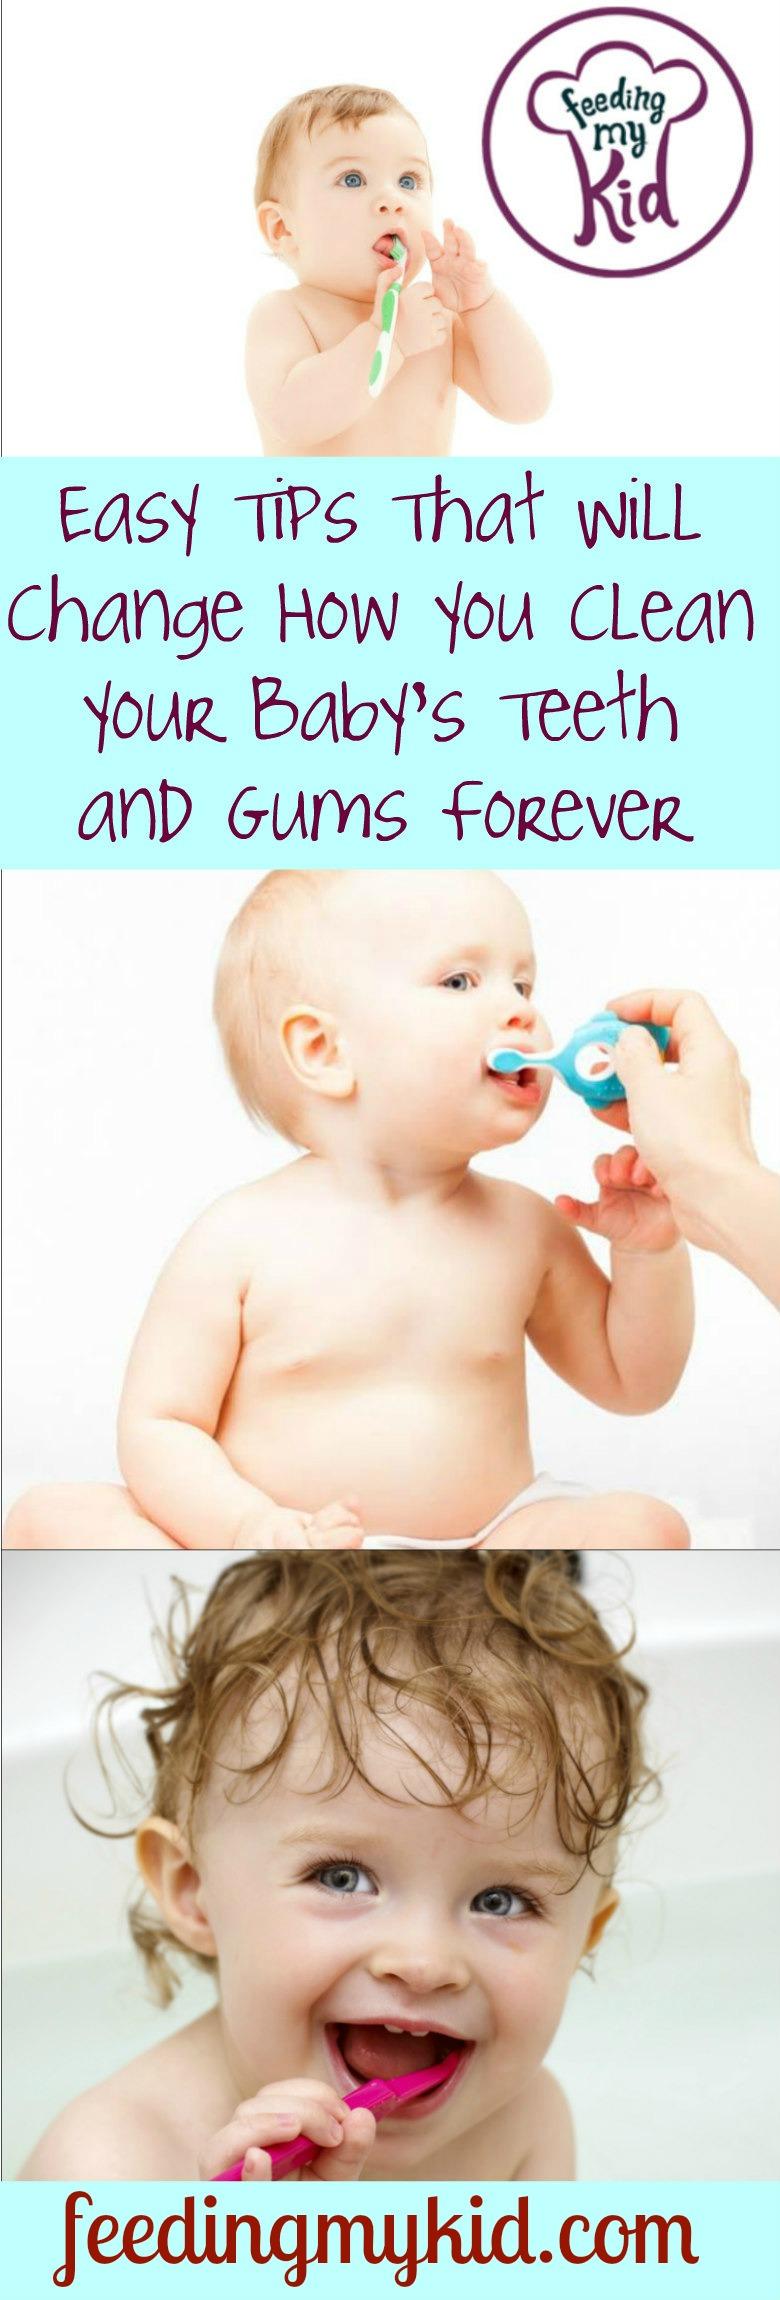 Check out these videos about brushing baby teeth and brushing your baby's gums. First, learn to do it with a baby cloth. Then, transition to a toothbrush!